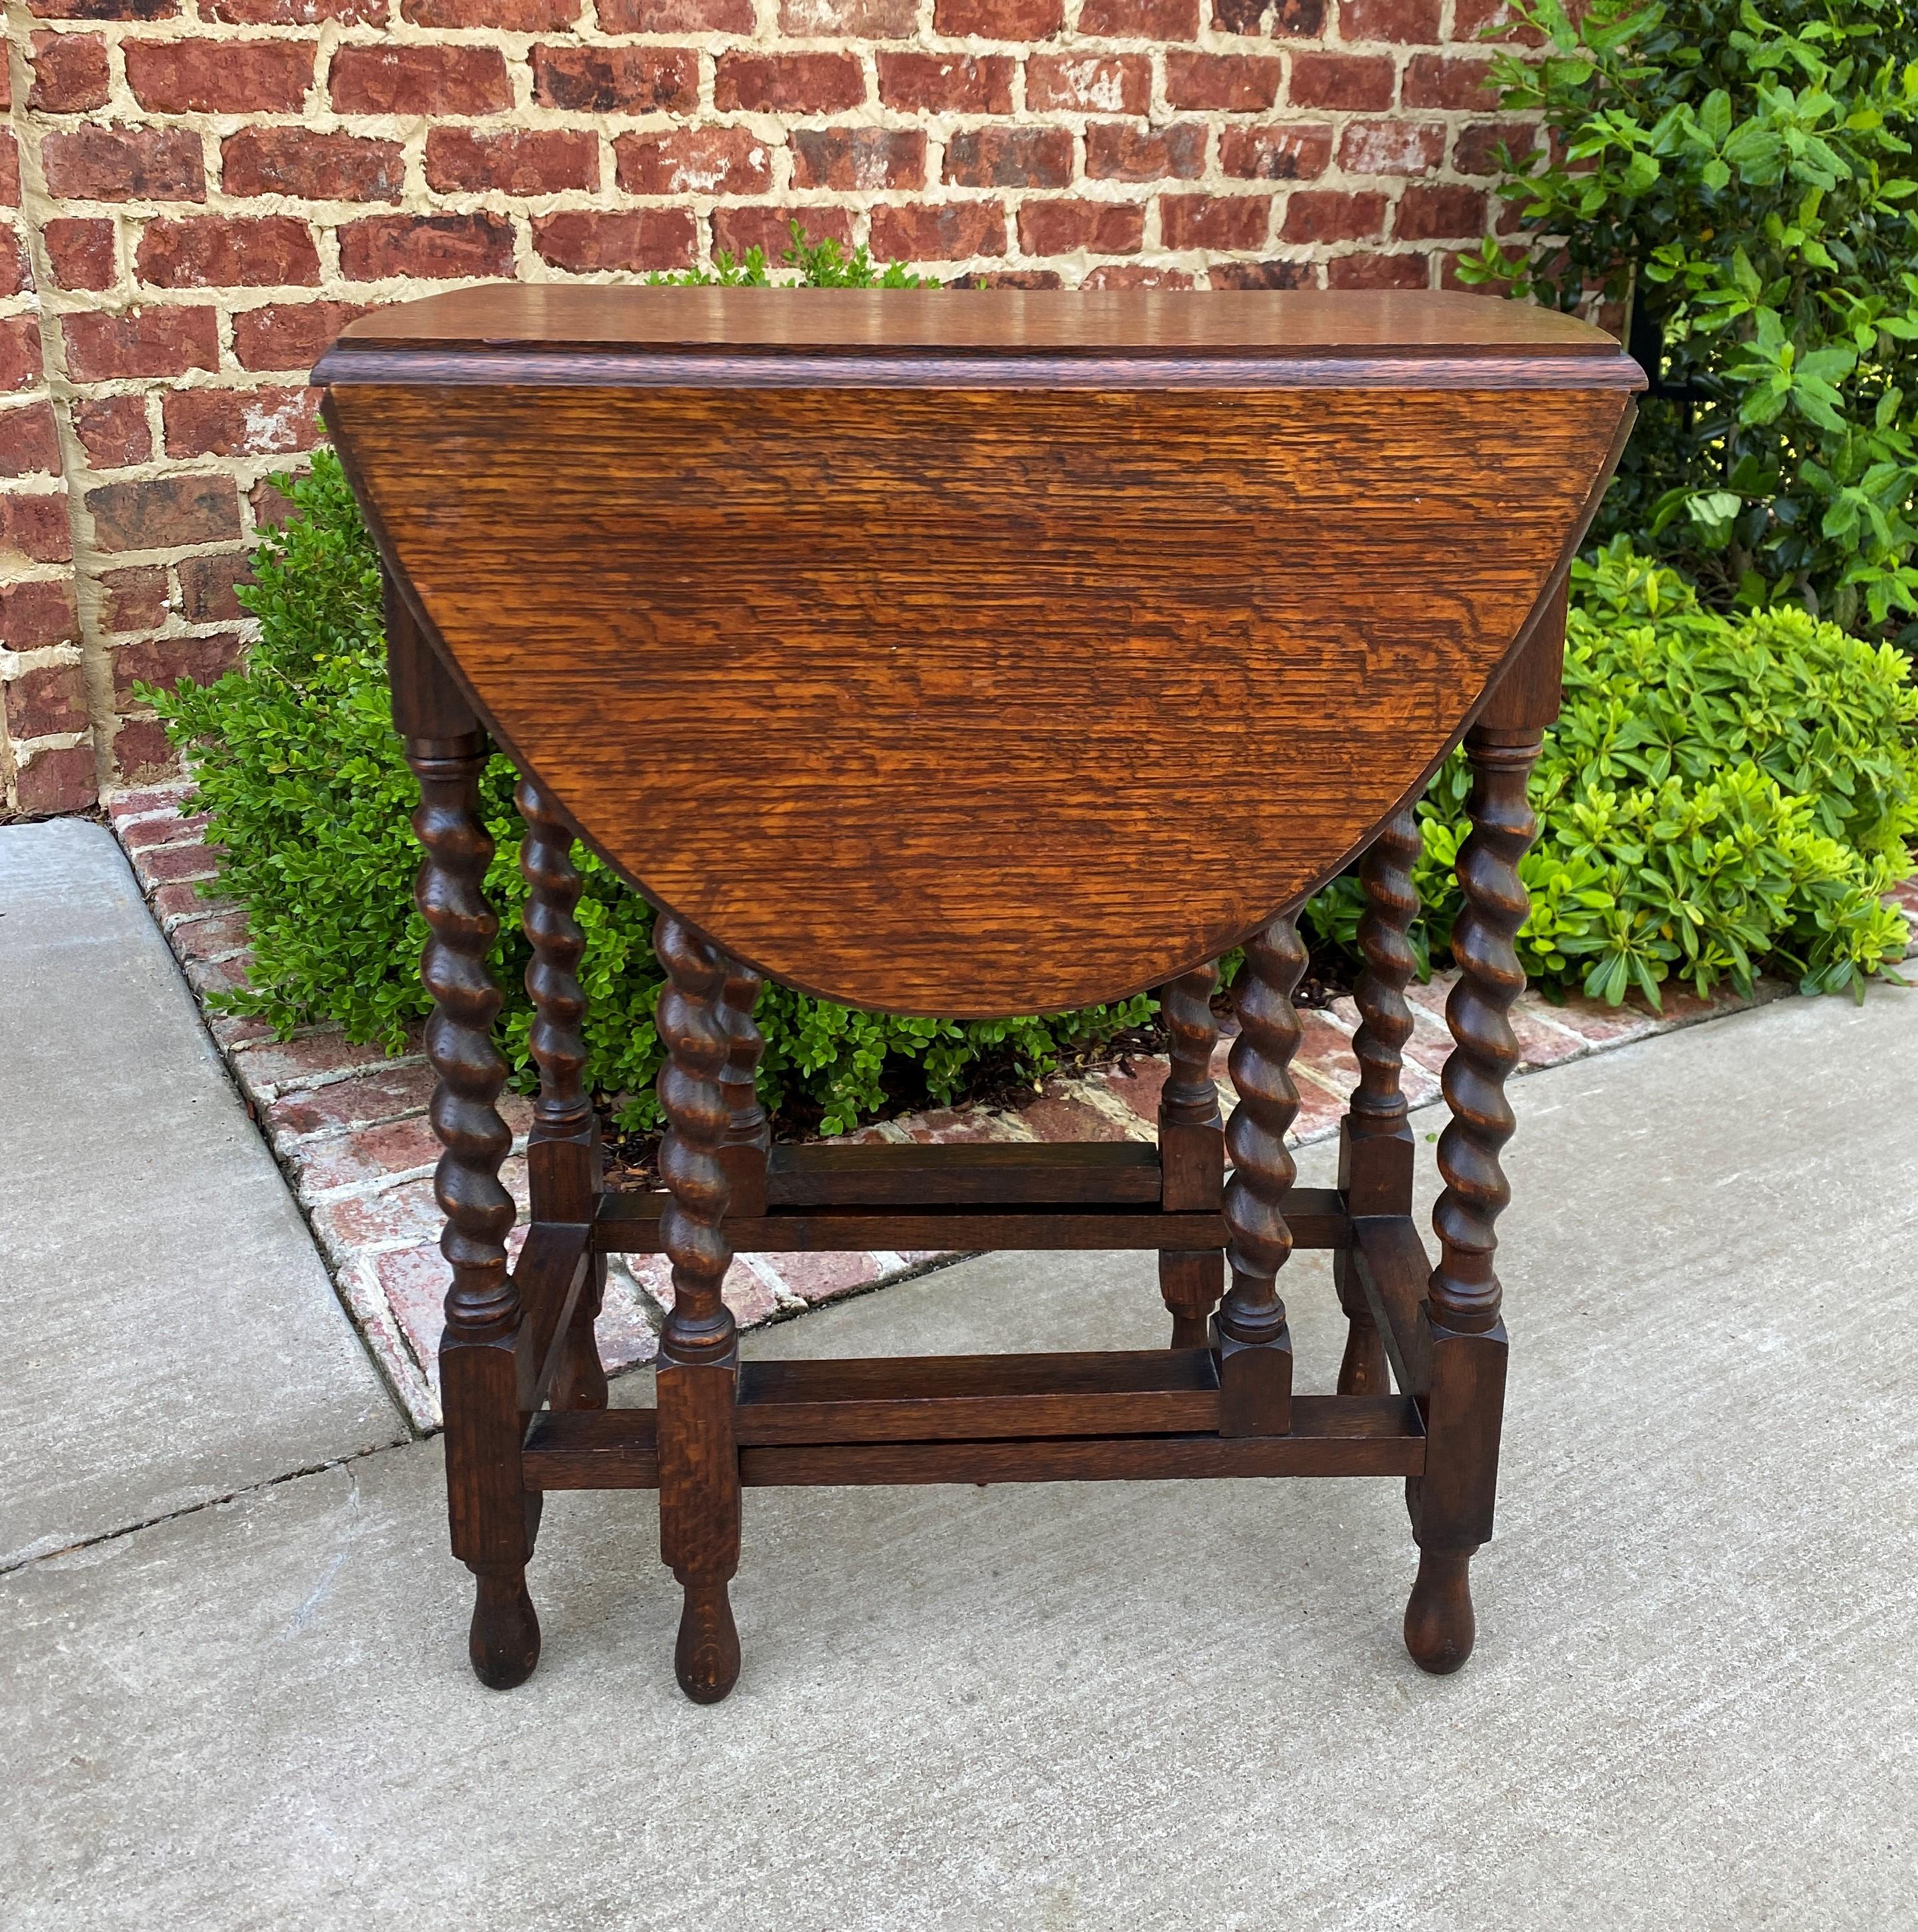 BEAUTIFUL Antique English Oak Drop Leaf Gateleg Oval Table~~Barley Twist Legs~~c. 1920s 


 Always in high demand~~hard-to-find drop leaf table rare petite size

 Solid and sturdy~~very nice oak patina 

 Versatile size
 27.75